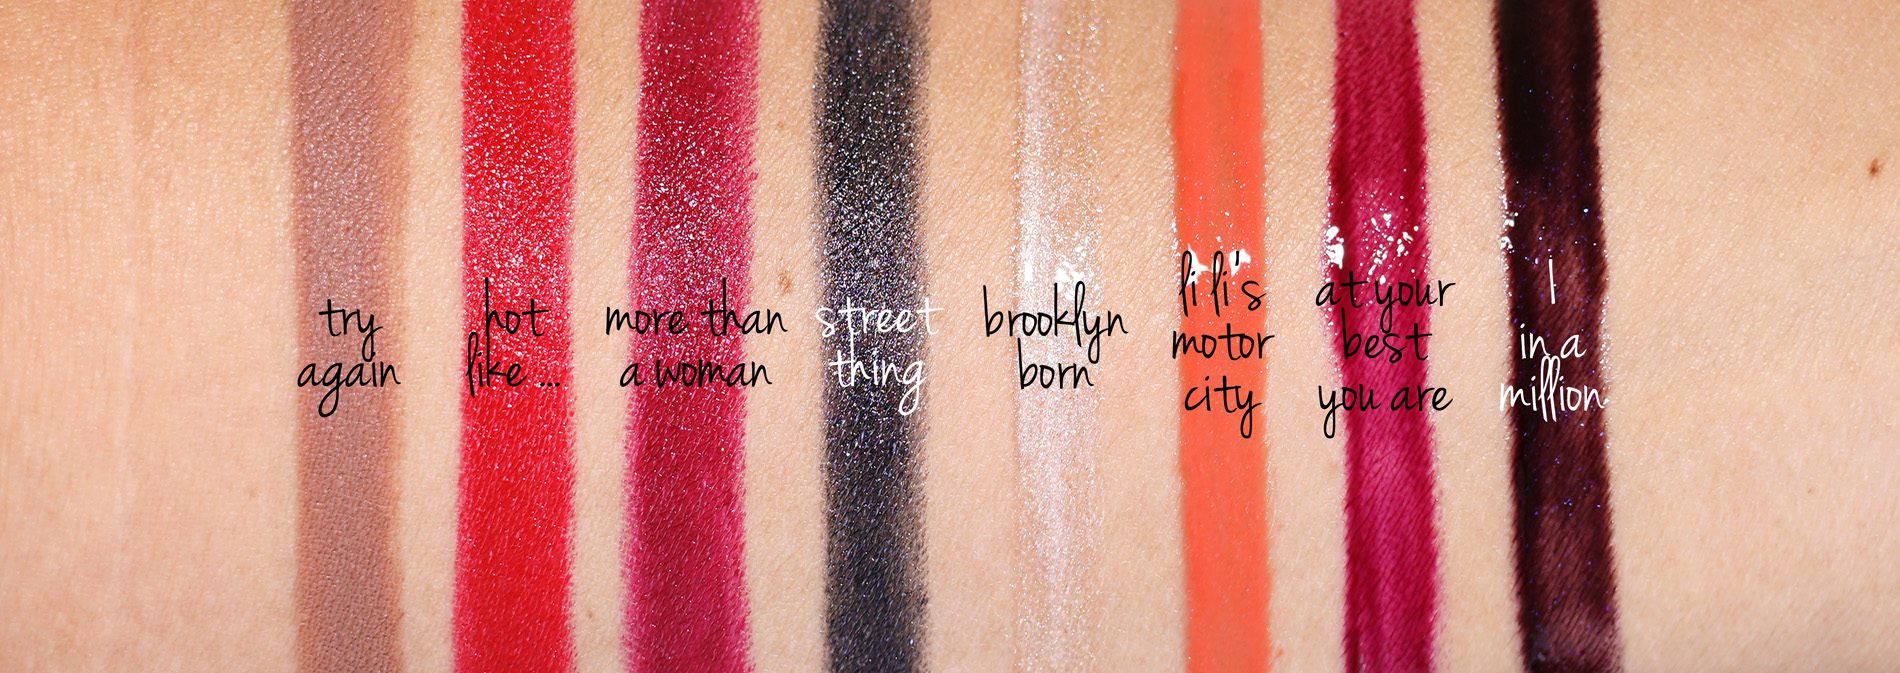 MAC x Aaliyah Collection Review + Swatches | The Beauty Look Book